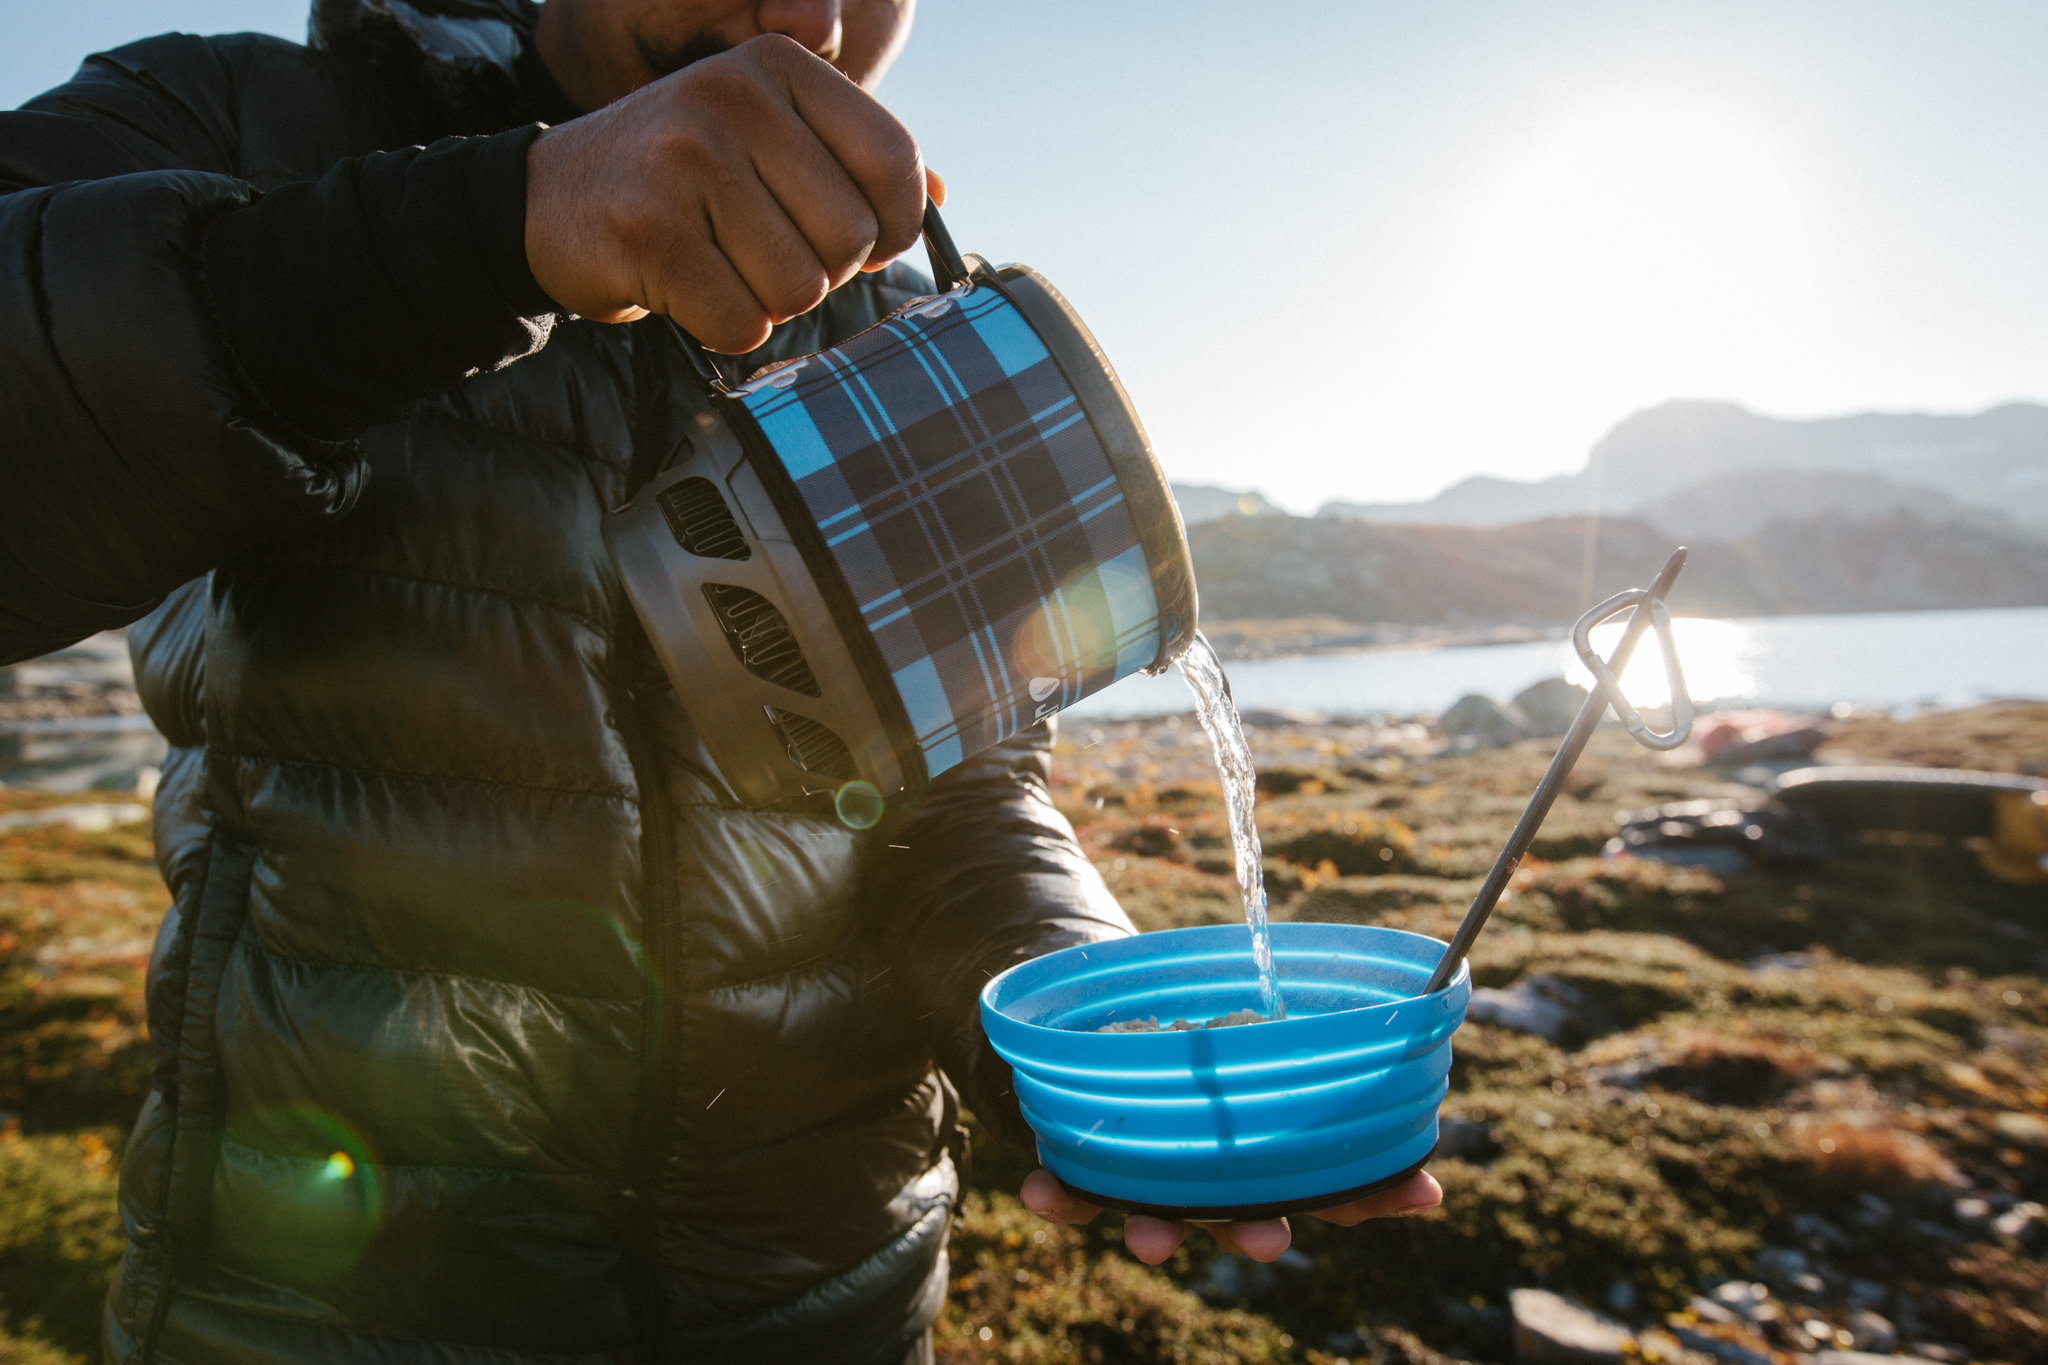 Adventure Tested: Jetboil MiniMo Backpacking Stove